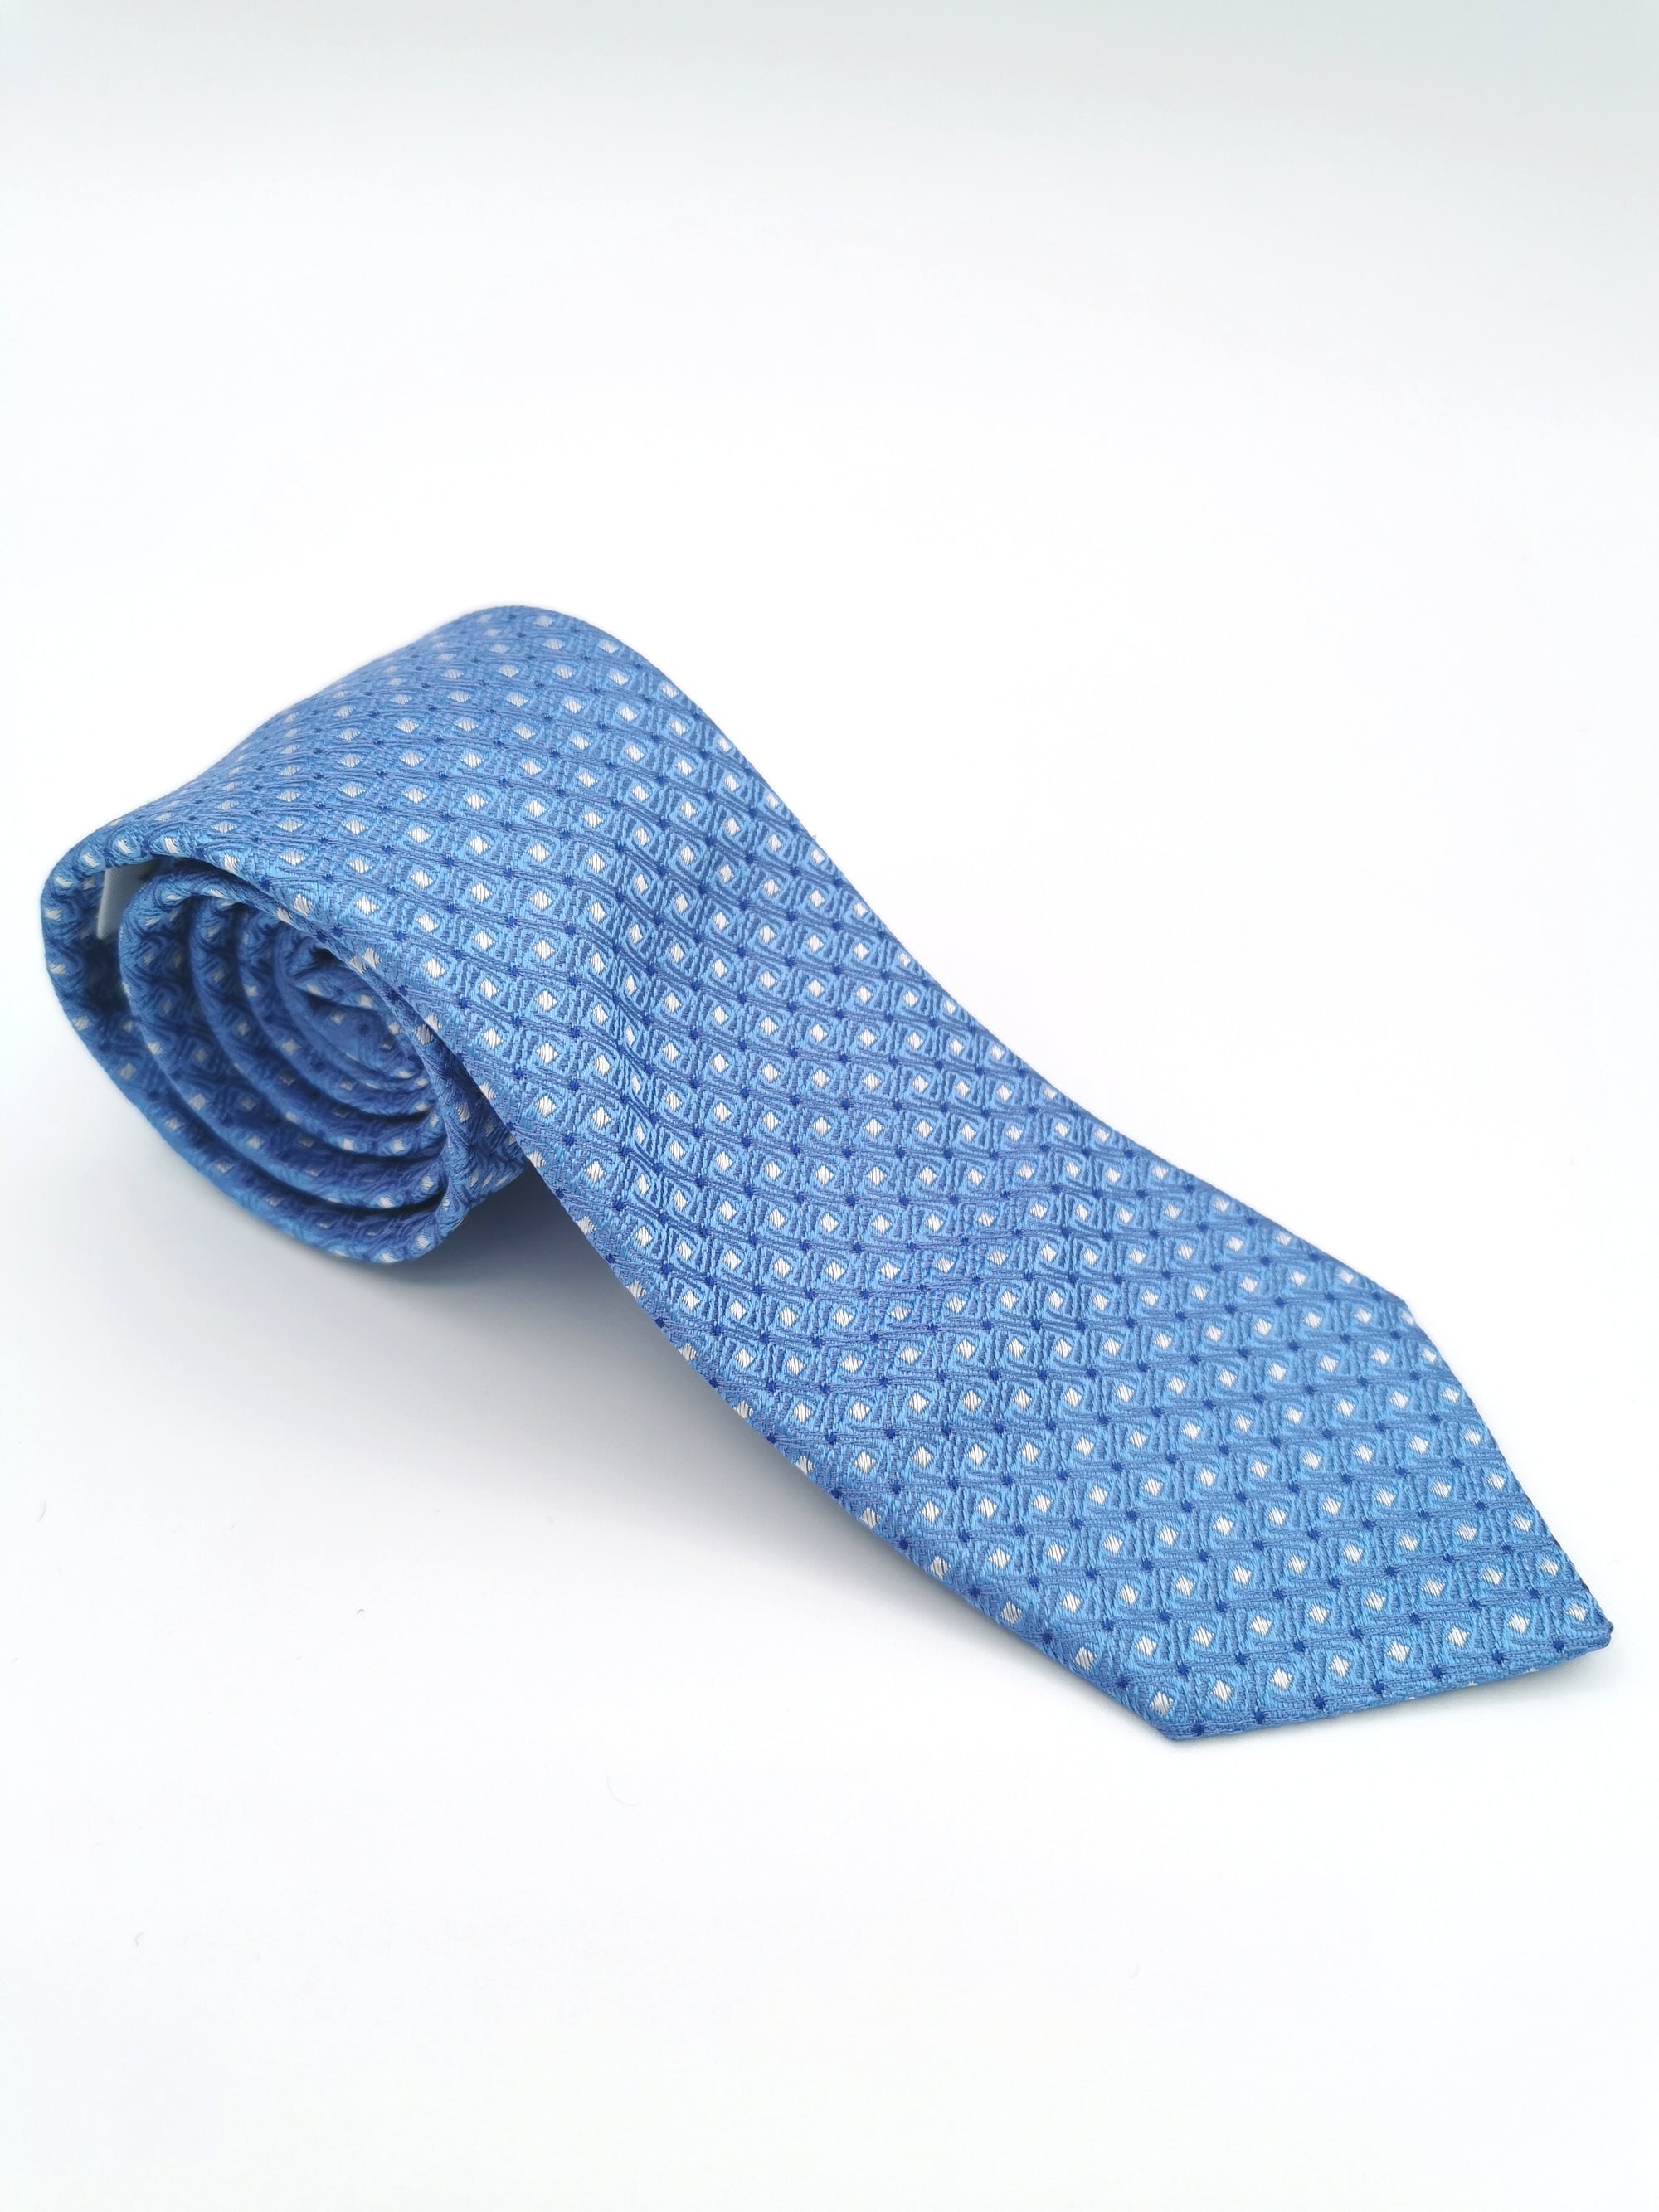 Ferala tie with small rectangles pattern